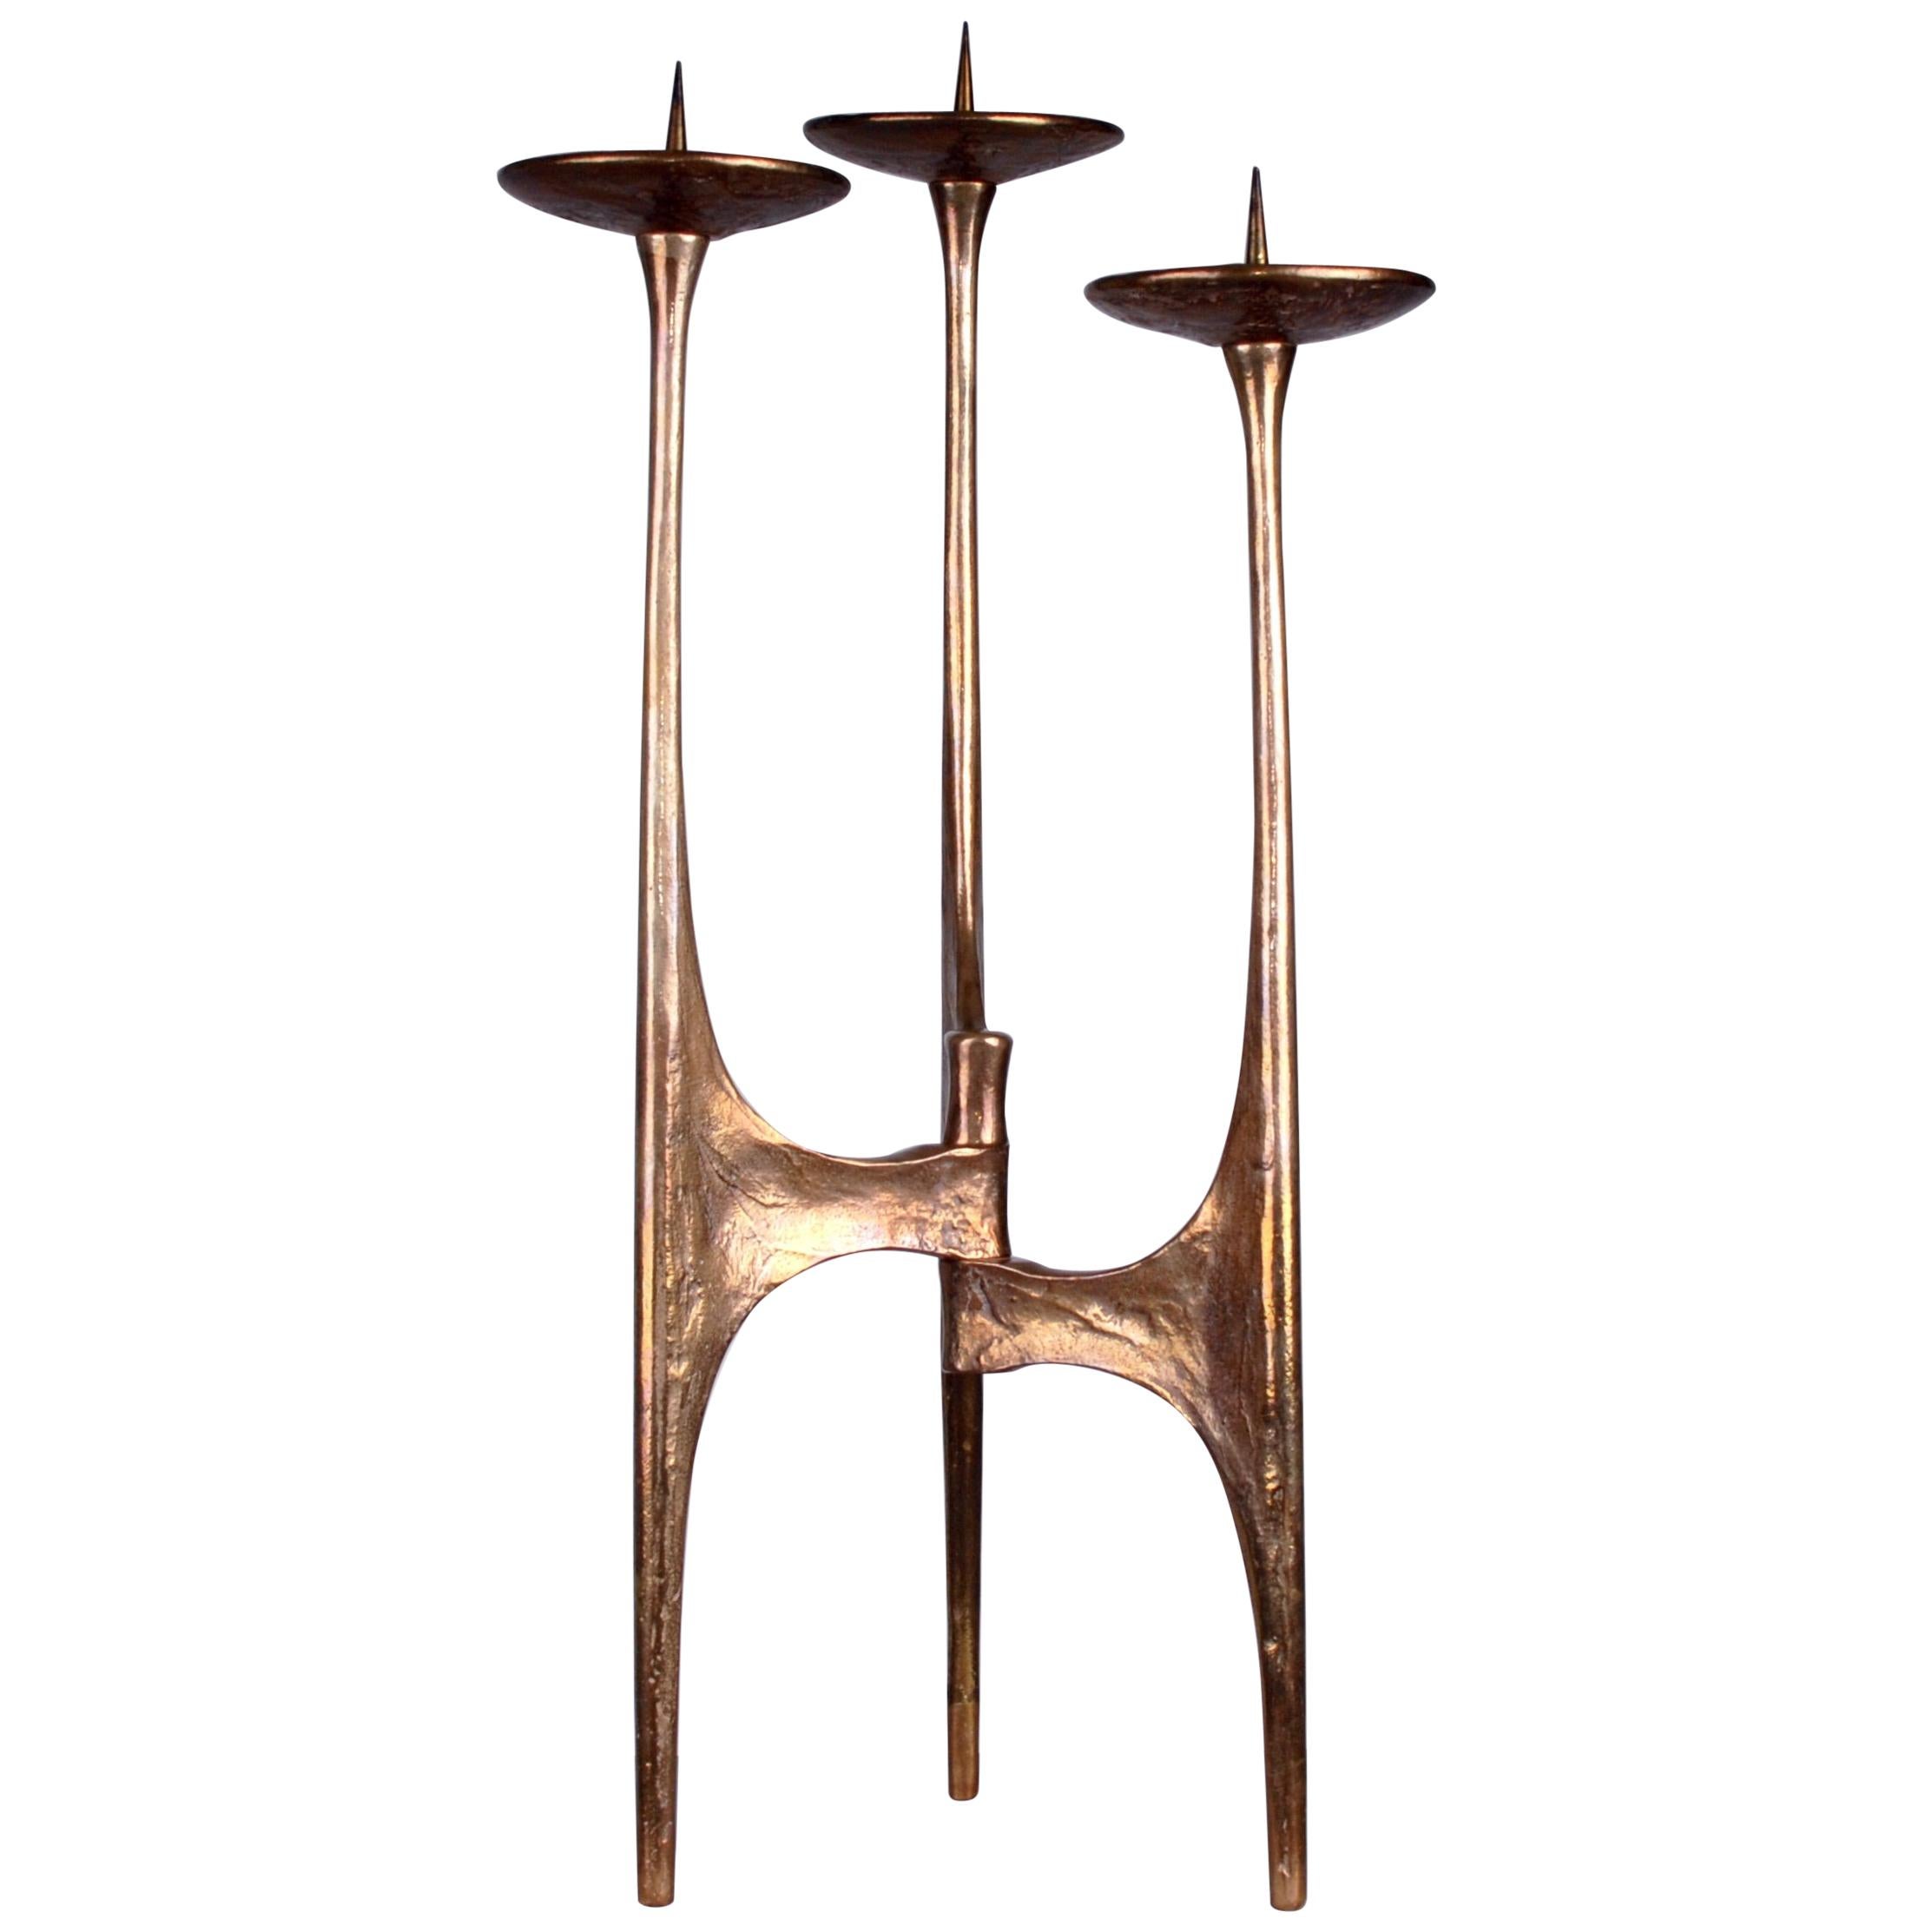 Monumental Mid-Century Modern Bronze Candelabra by Harjes, Germany, Late 1970